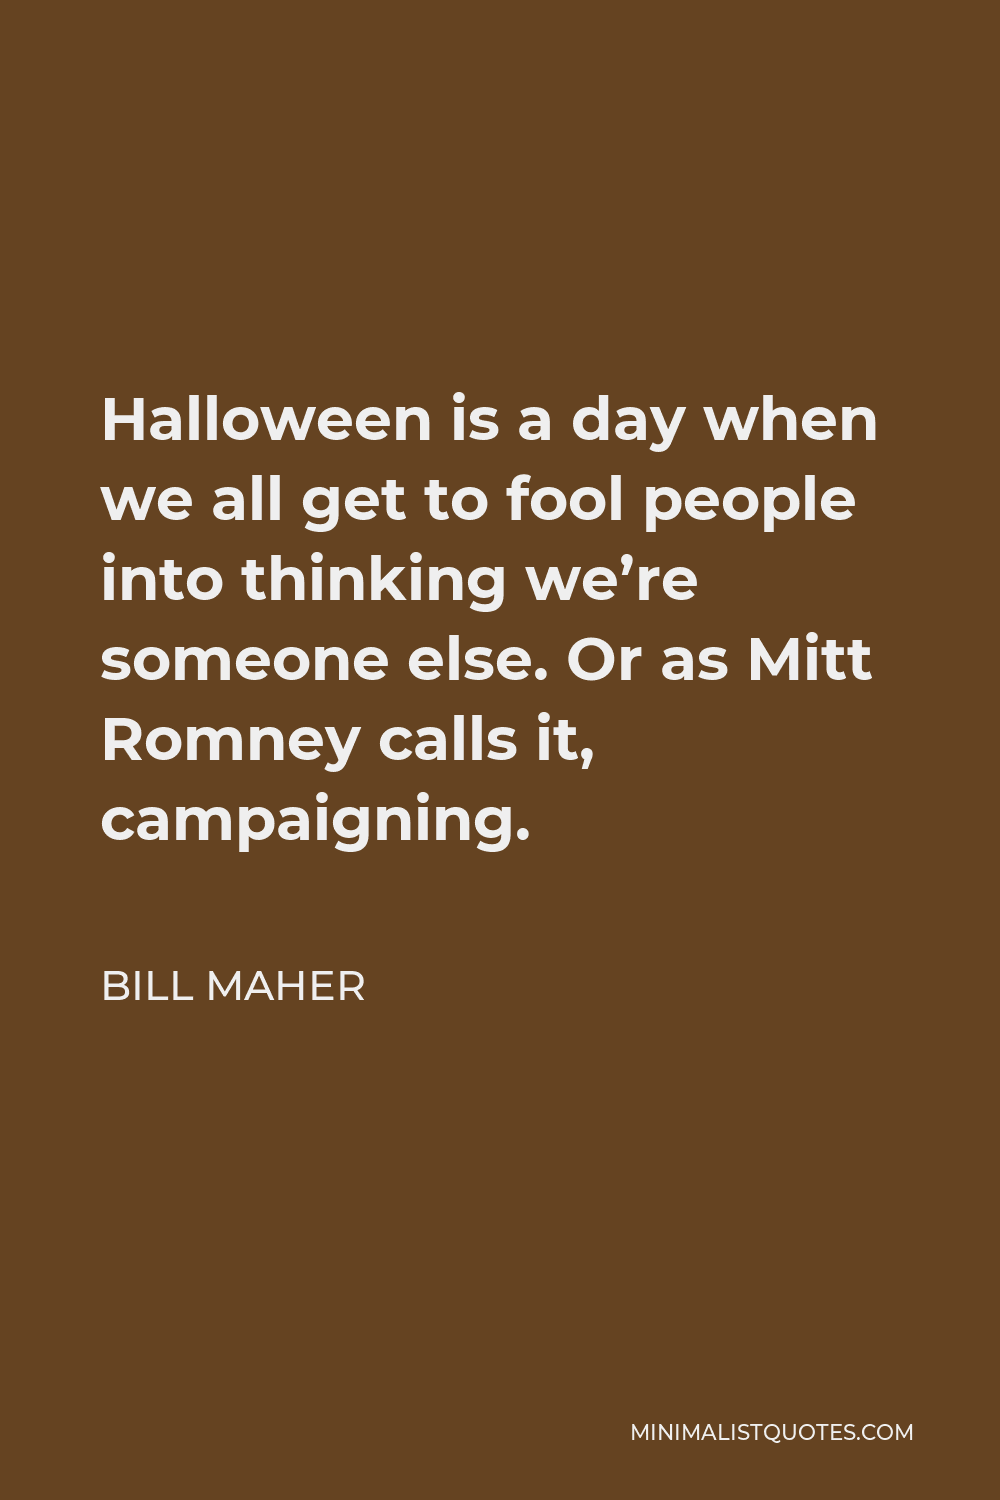 Bill Maher Quote - Halloween is a day when we all get to fool people into thinking we’re someone else. Or as Mitt Romney calls it, campaigning.